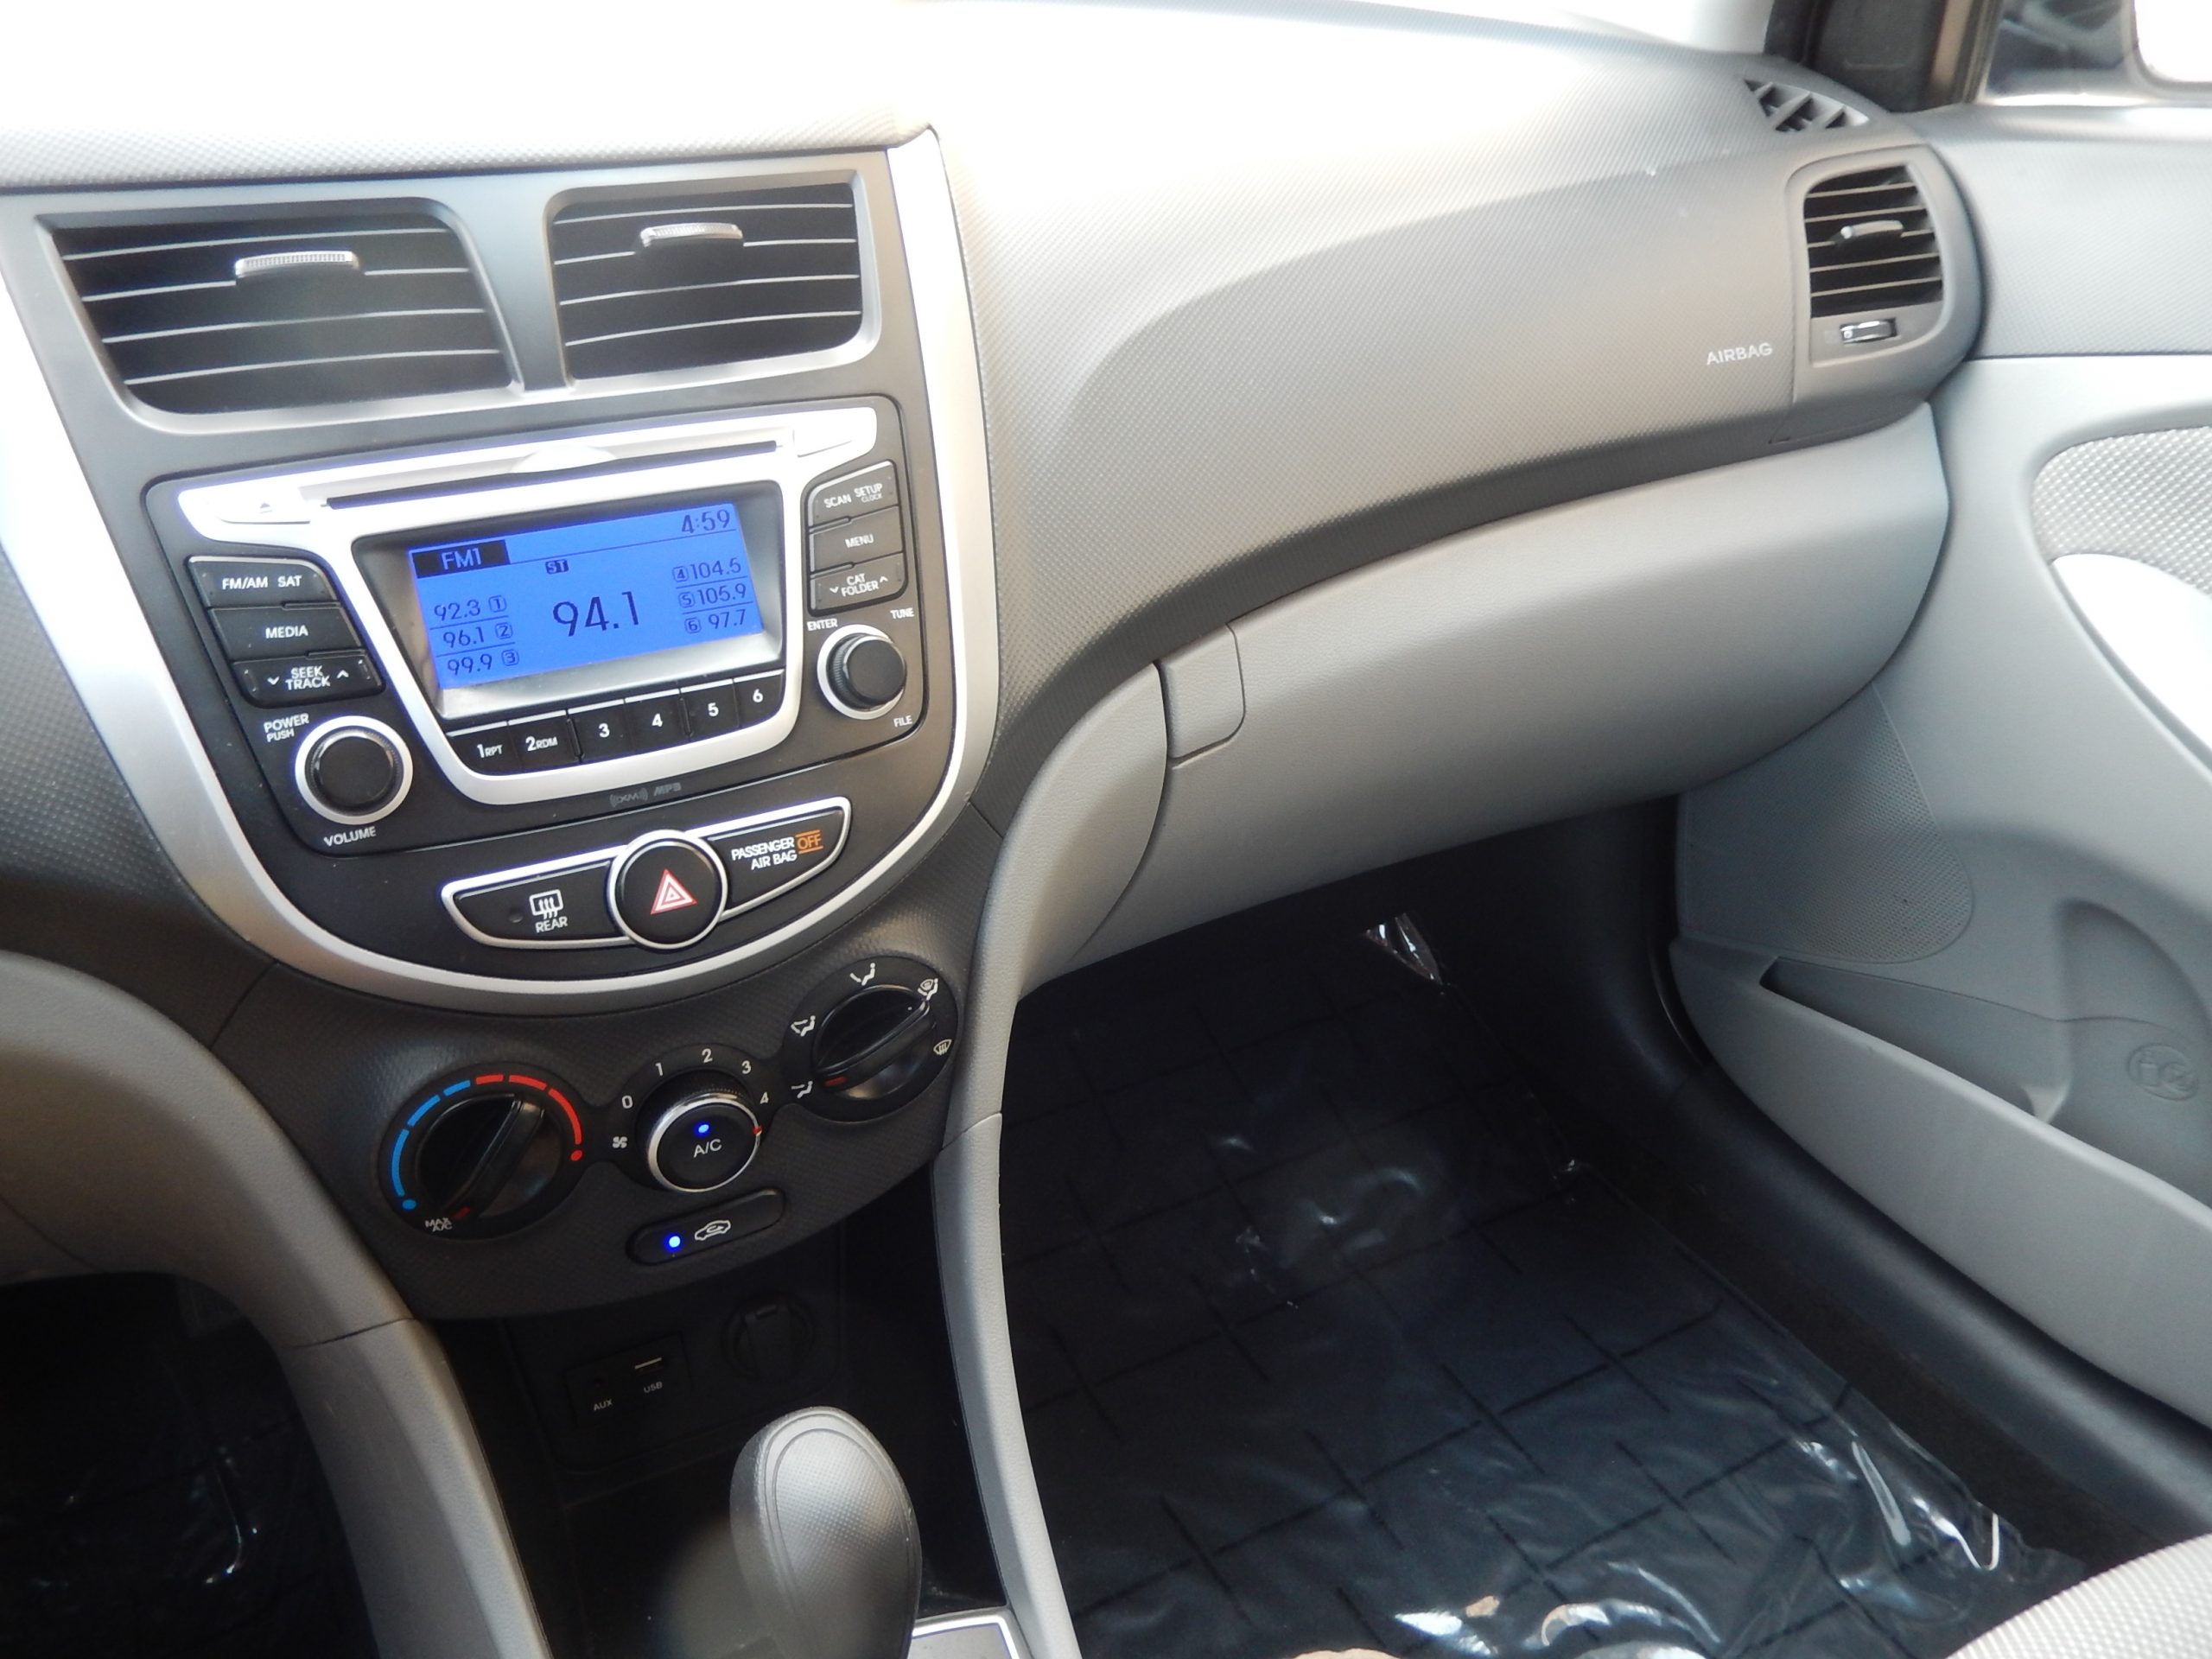 Used 2014 Hyundai Accent GLS Sedan for sale in 